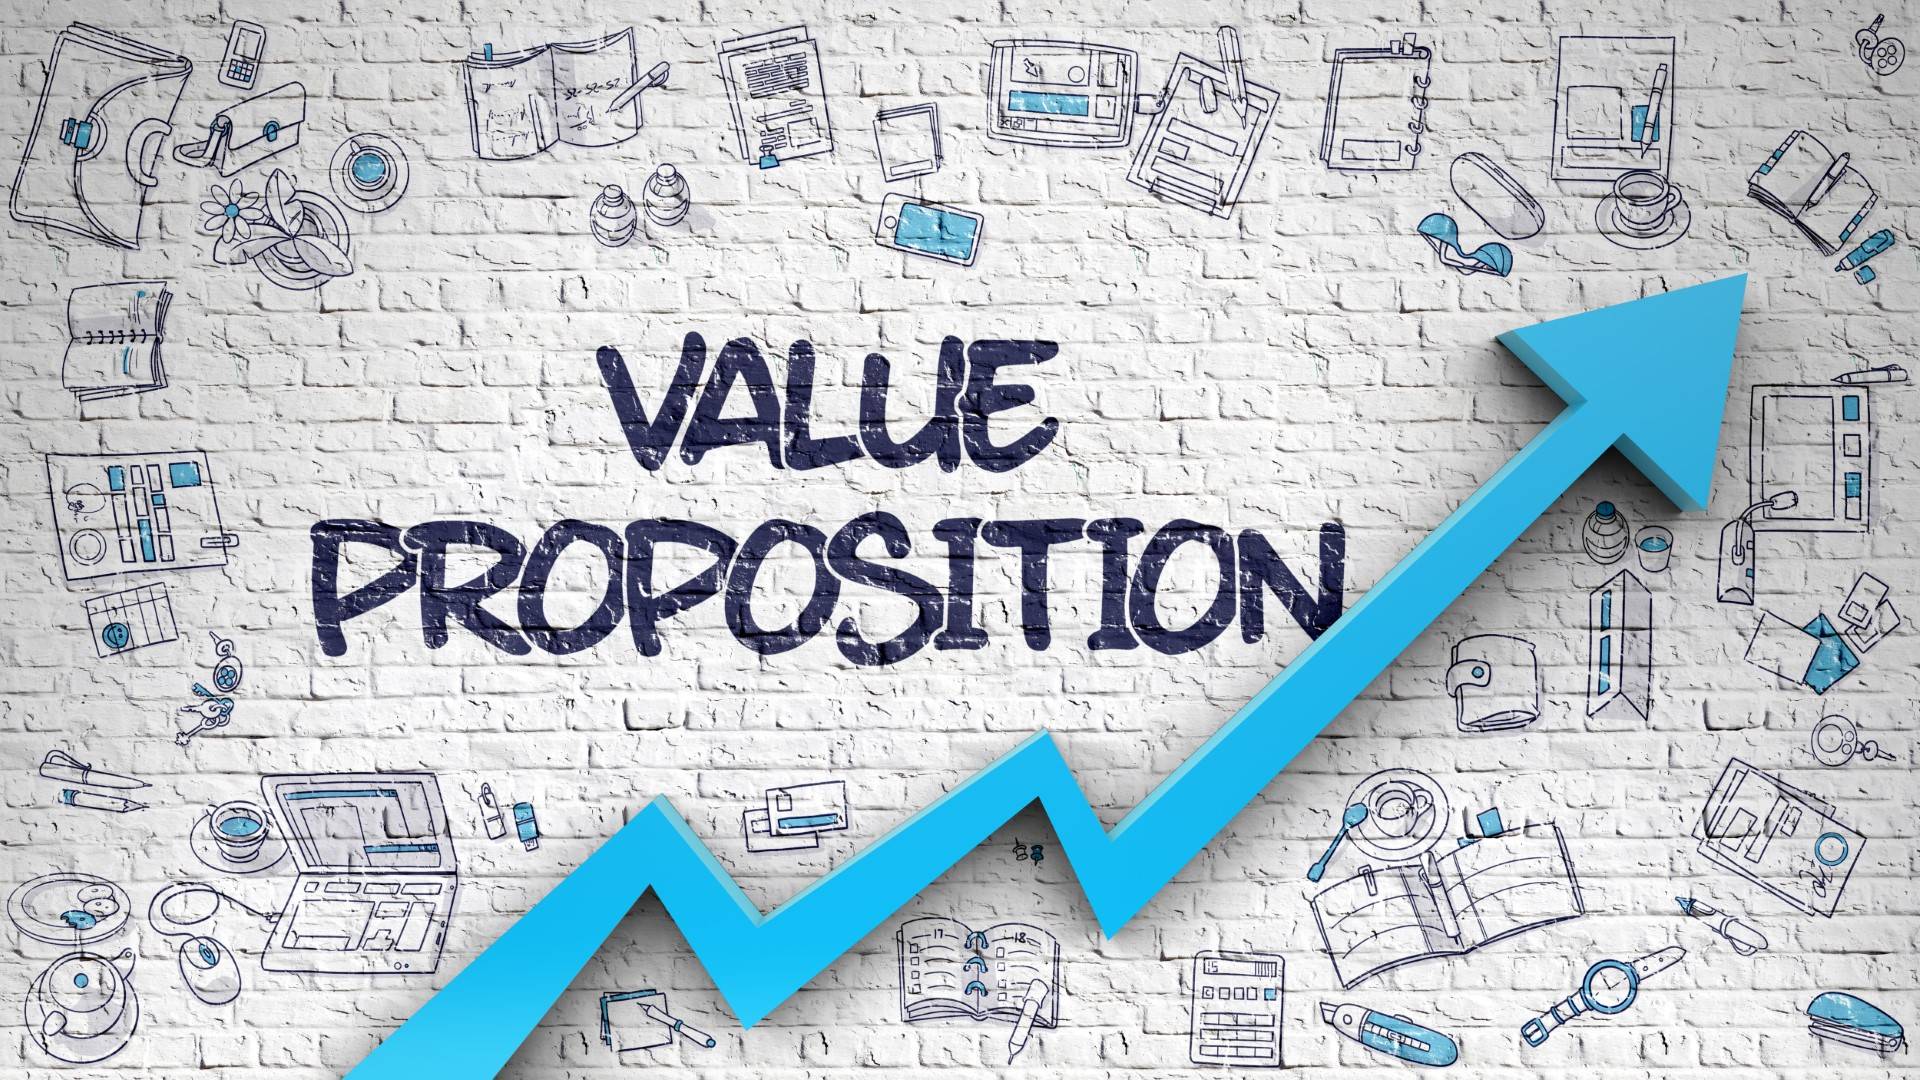 Value Proposition Inscription on the Modern Illustation with Blue 3d Arrow and Doodle Icons Around. Value Proposition Drawn on White Brick Wall. Illustration with Hand Drawn Icons. 3d.